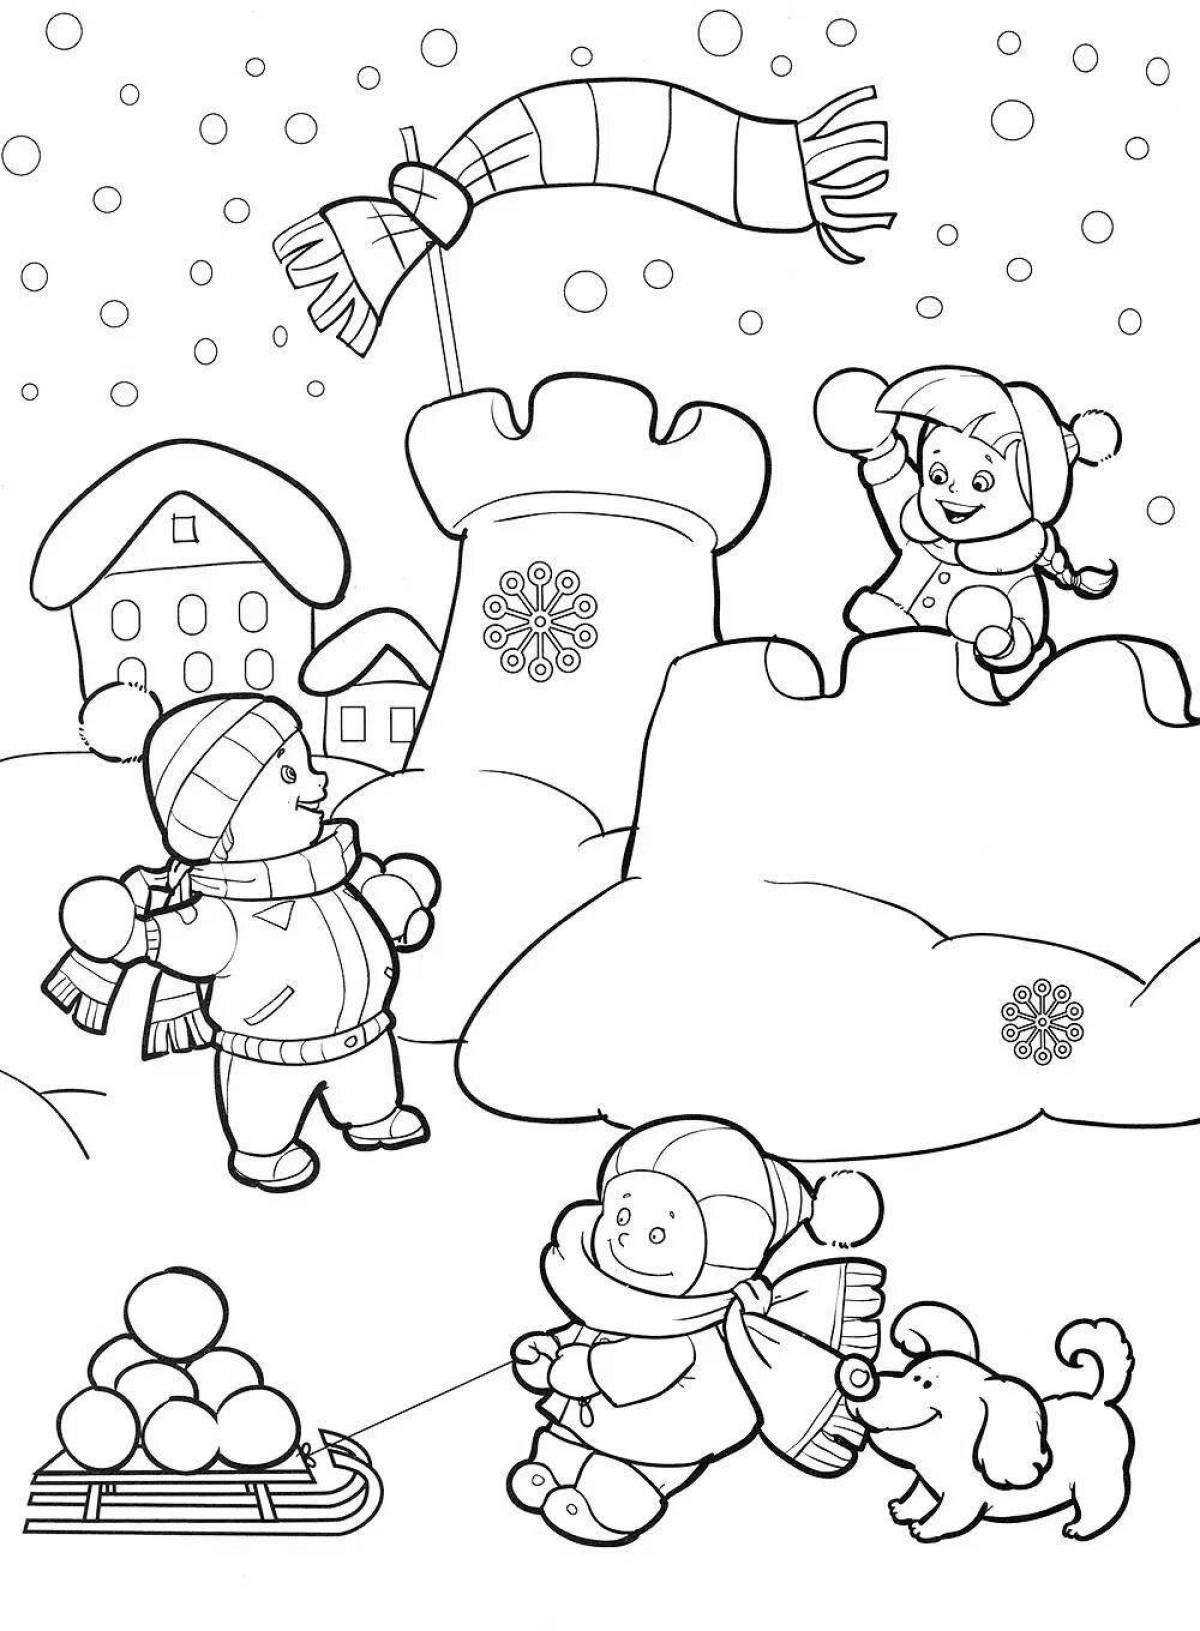 Shining coloring page 4 5 years of winter